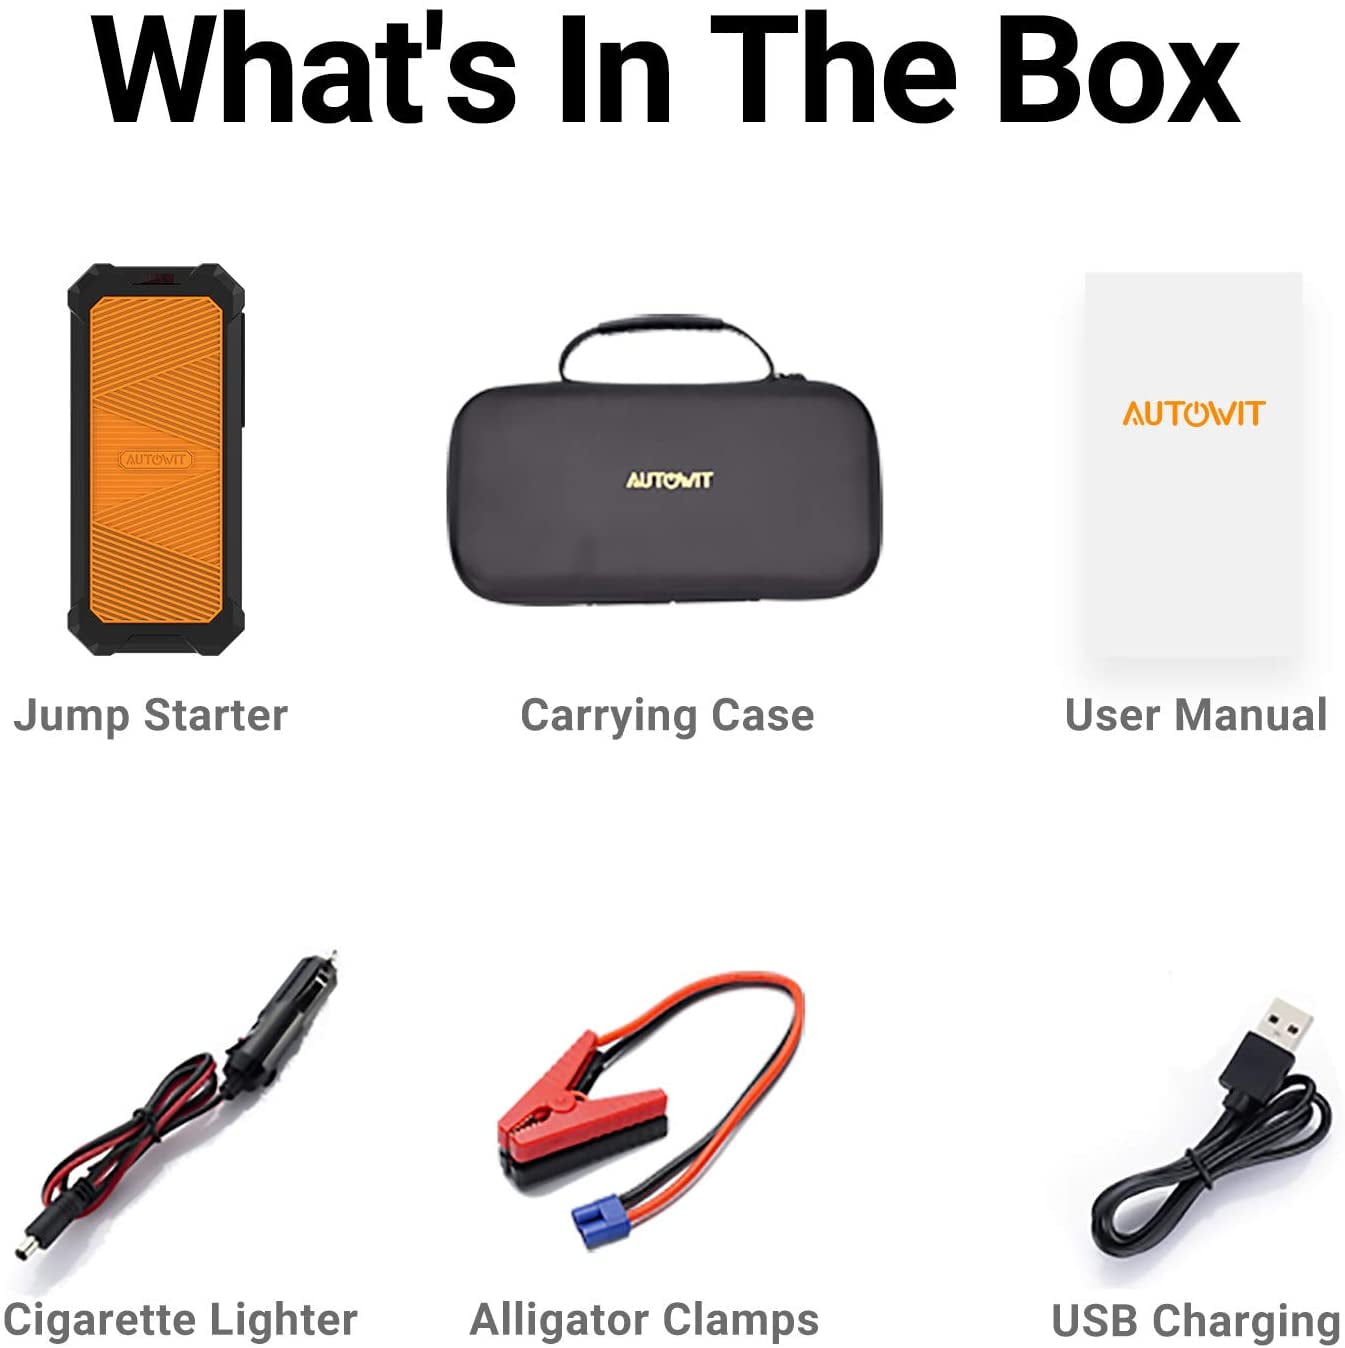 Autowit SuperCap 2 12-Volt Battery-Less Portable Jump Starter, Up to 7.0L  Gas, 4.0L Diesel Engine Built-in, No Need of Regular Charge